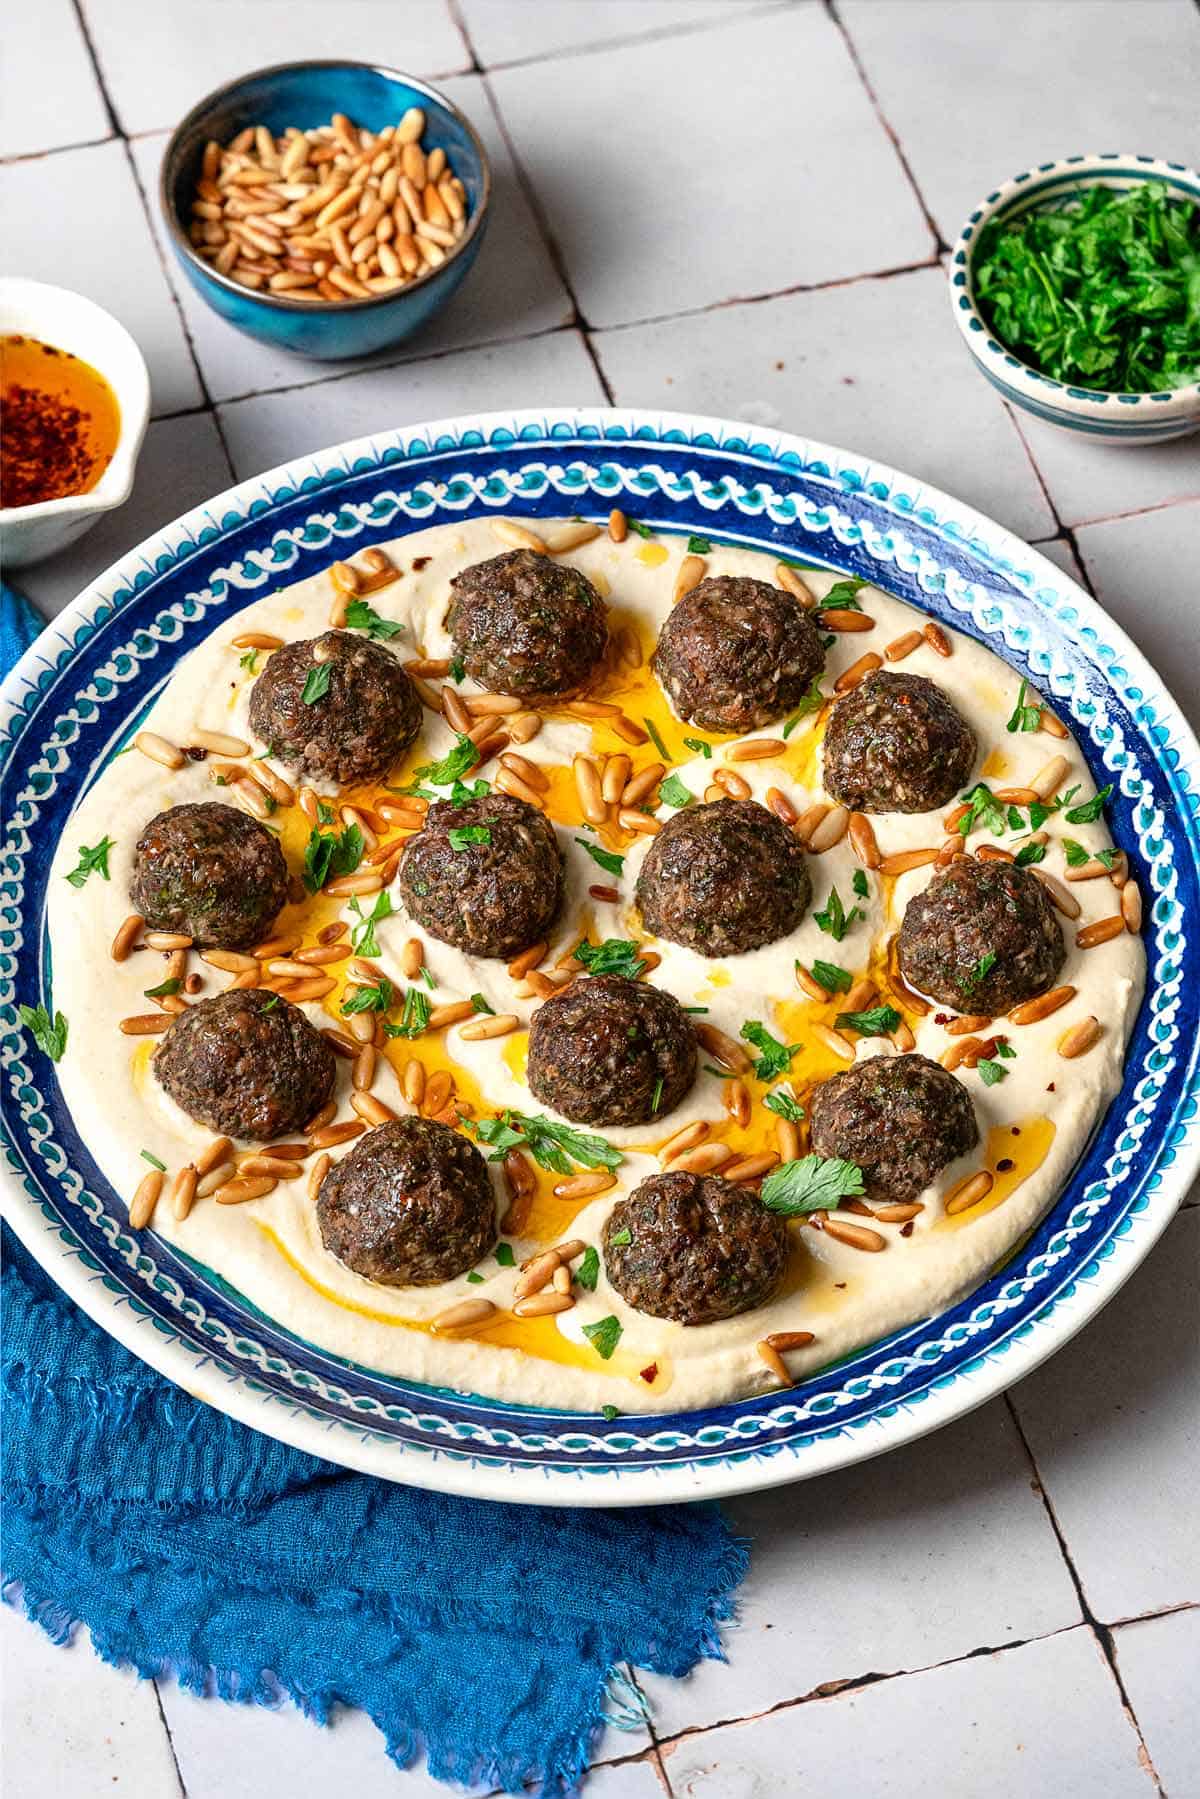 baked meatballs over hummus garnished with olive oil, pine nuts and parsley on a plate next to a blue napkin, and small bowls of parsley, pine nuts and olive oil.